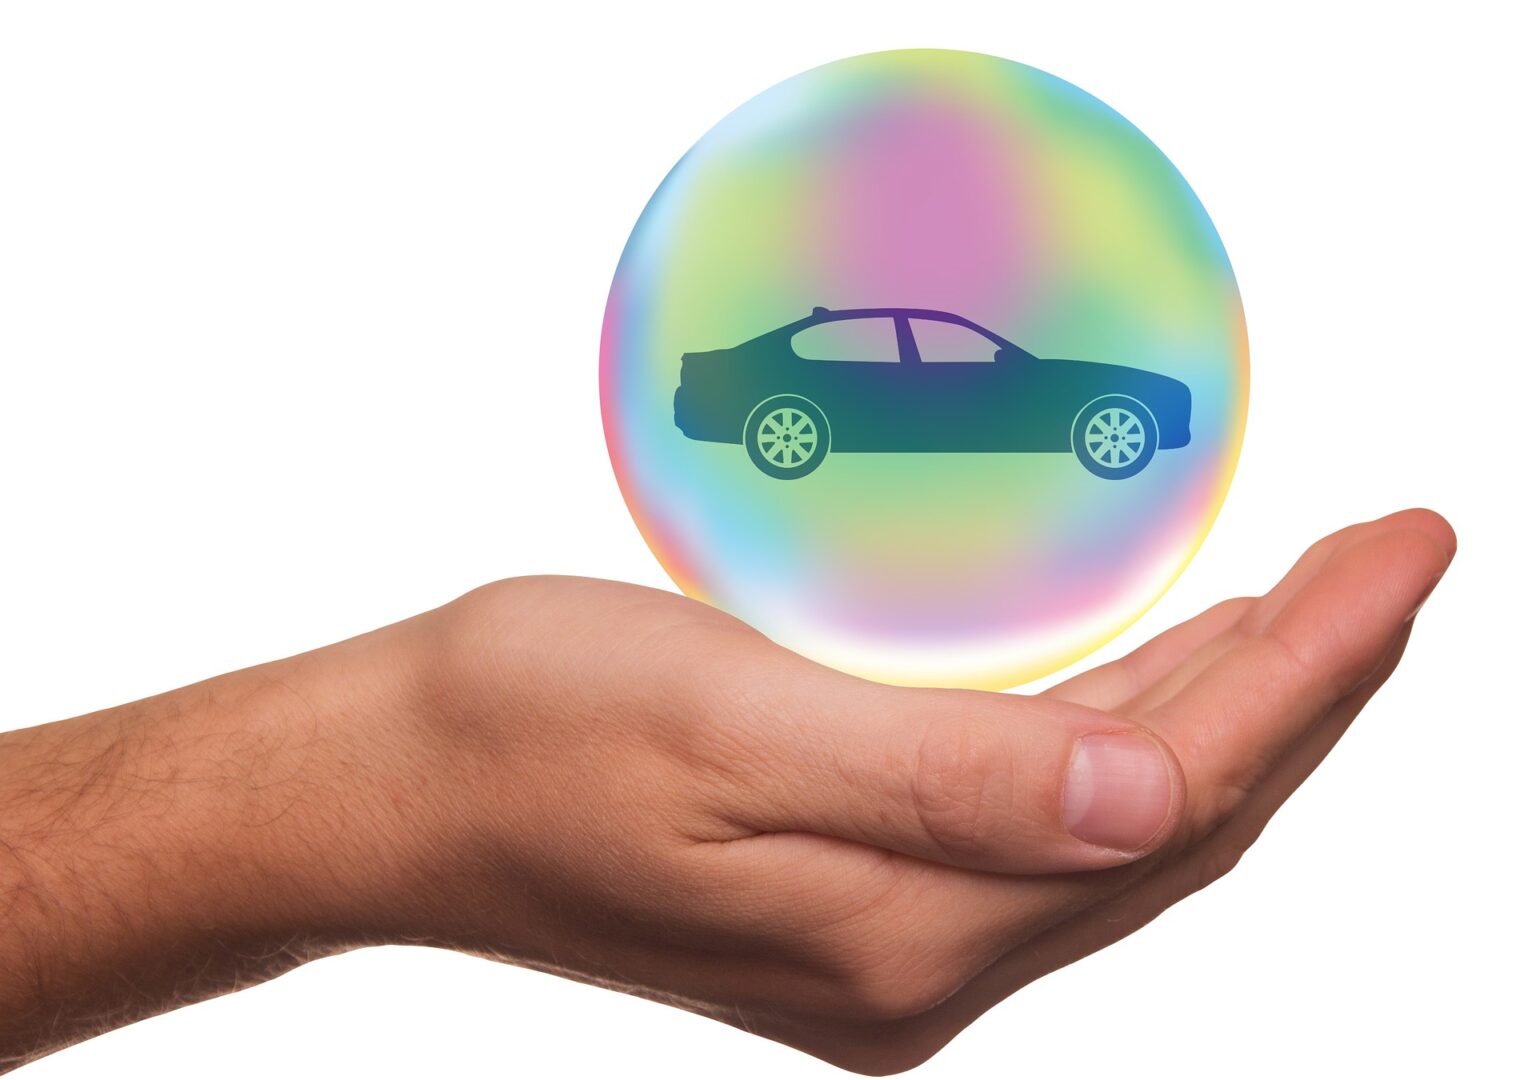 Hand holding bubble which is having image of a Car inside of it